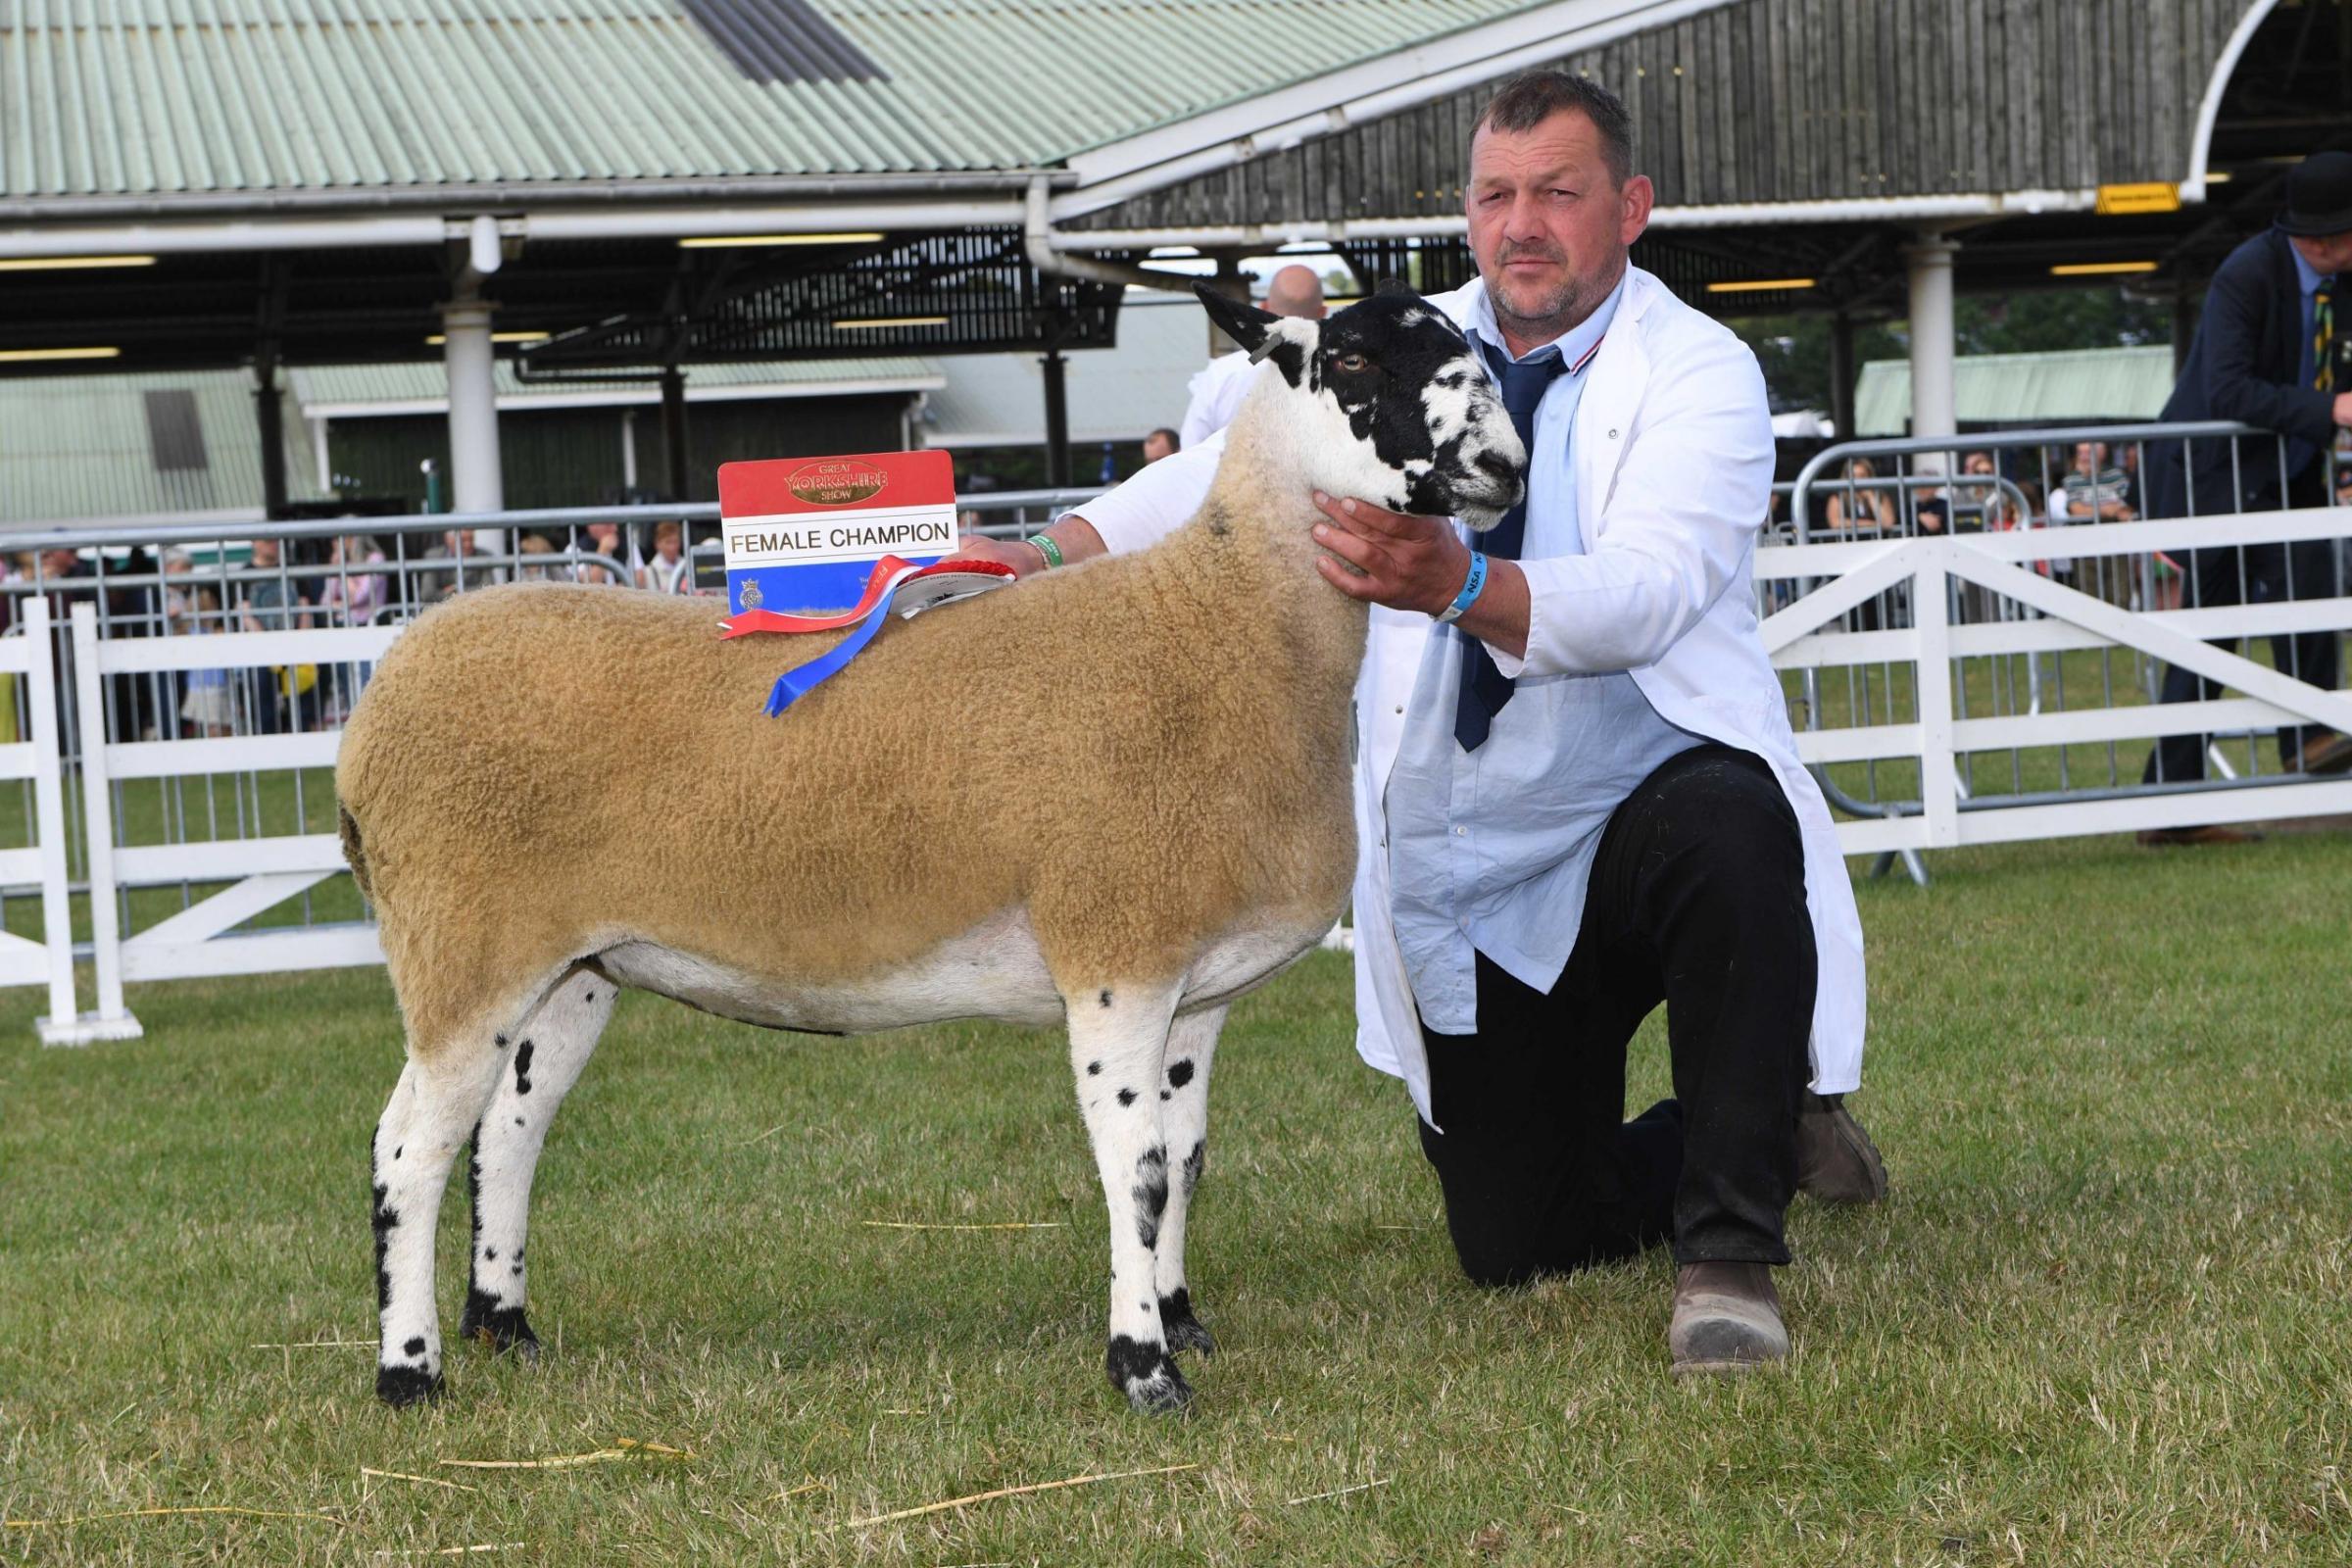 Commercial Female Champion Graeme Jackson from Mount Pleasant Farm, High Bentham with second sale gimmer lamb, North of England mule